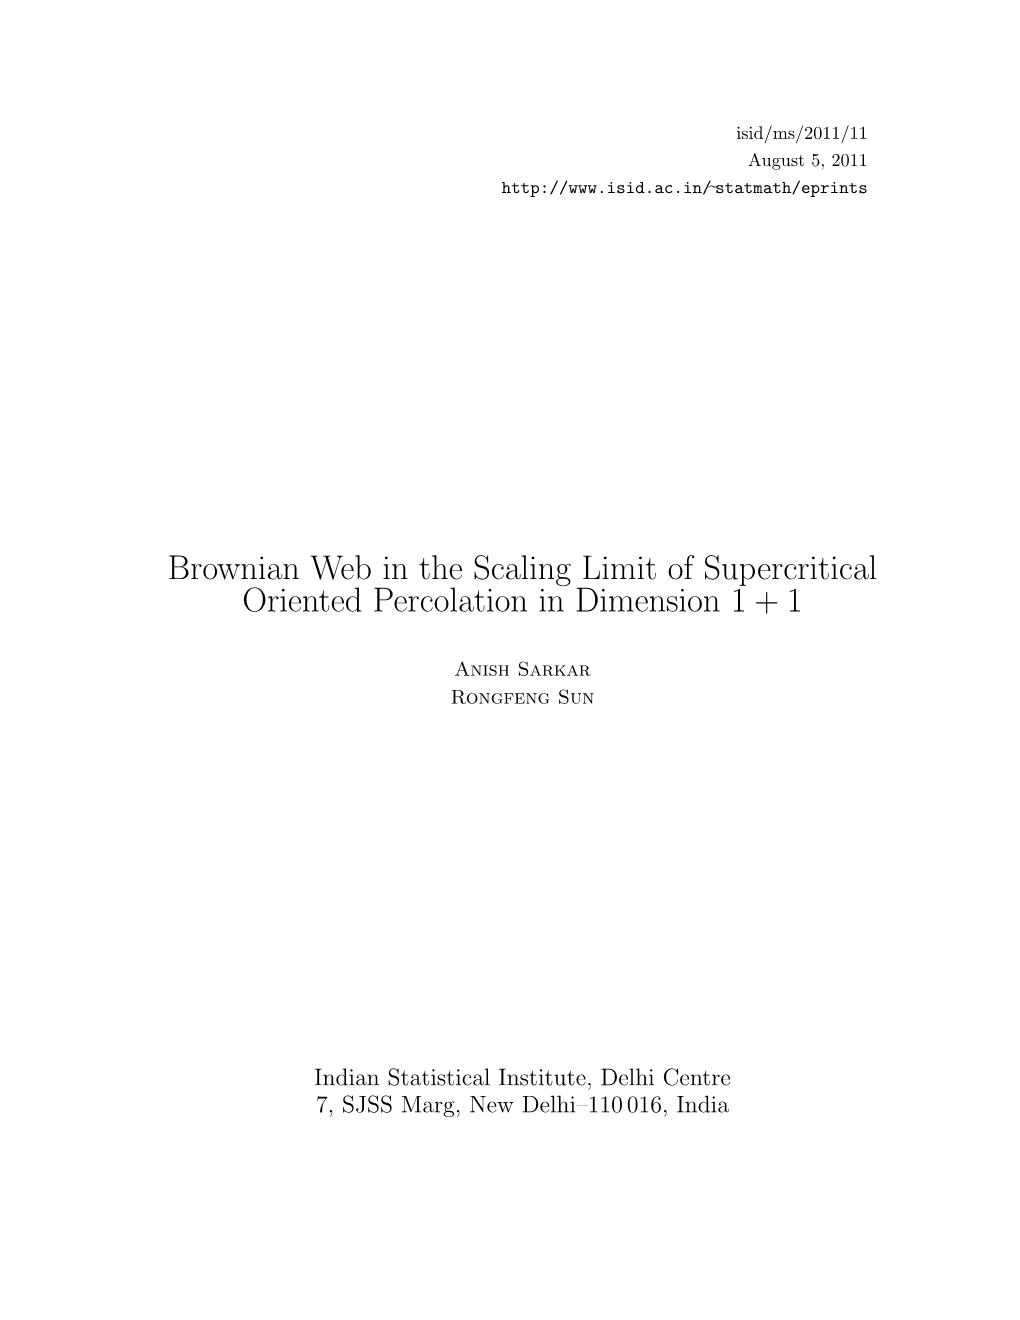 Brownian Web in the Scaling Limit of Supercritical Oriented Percolation in Dimension 1 + 1